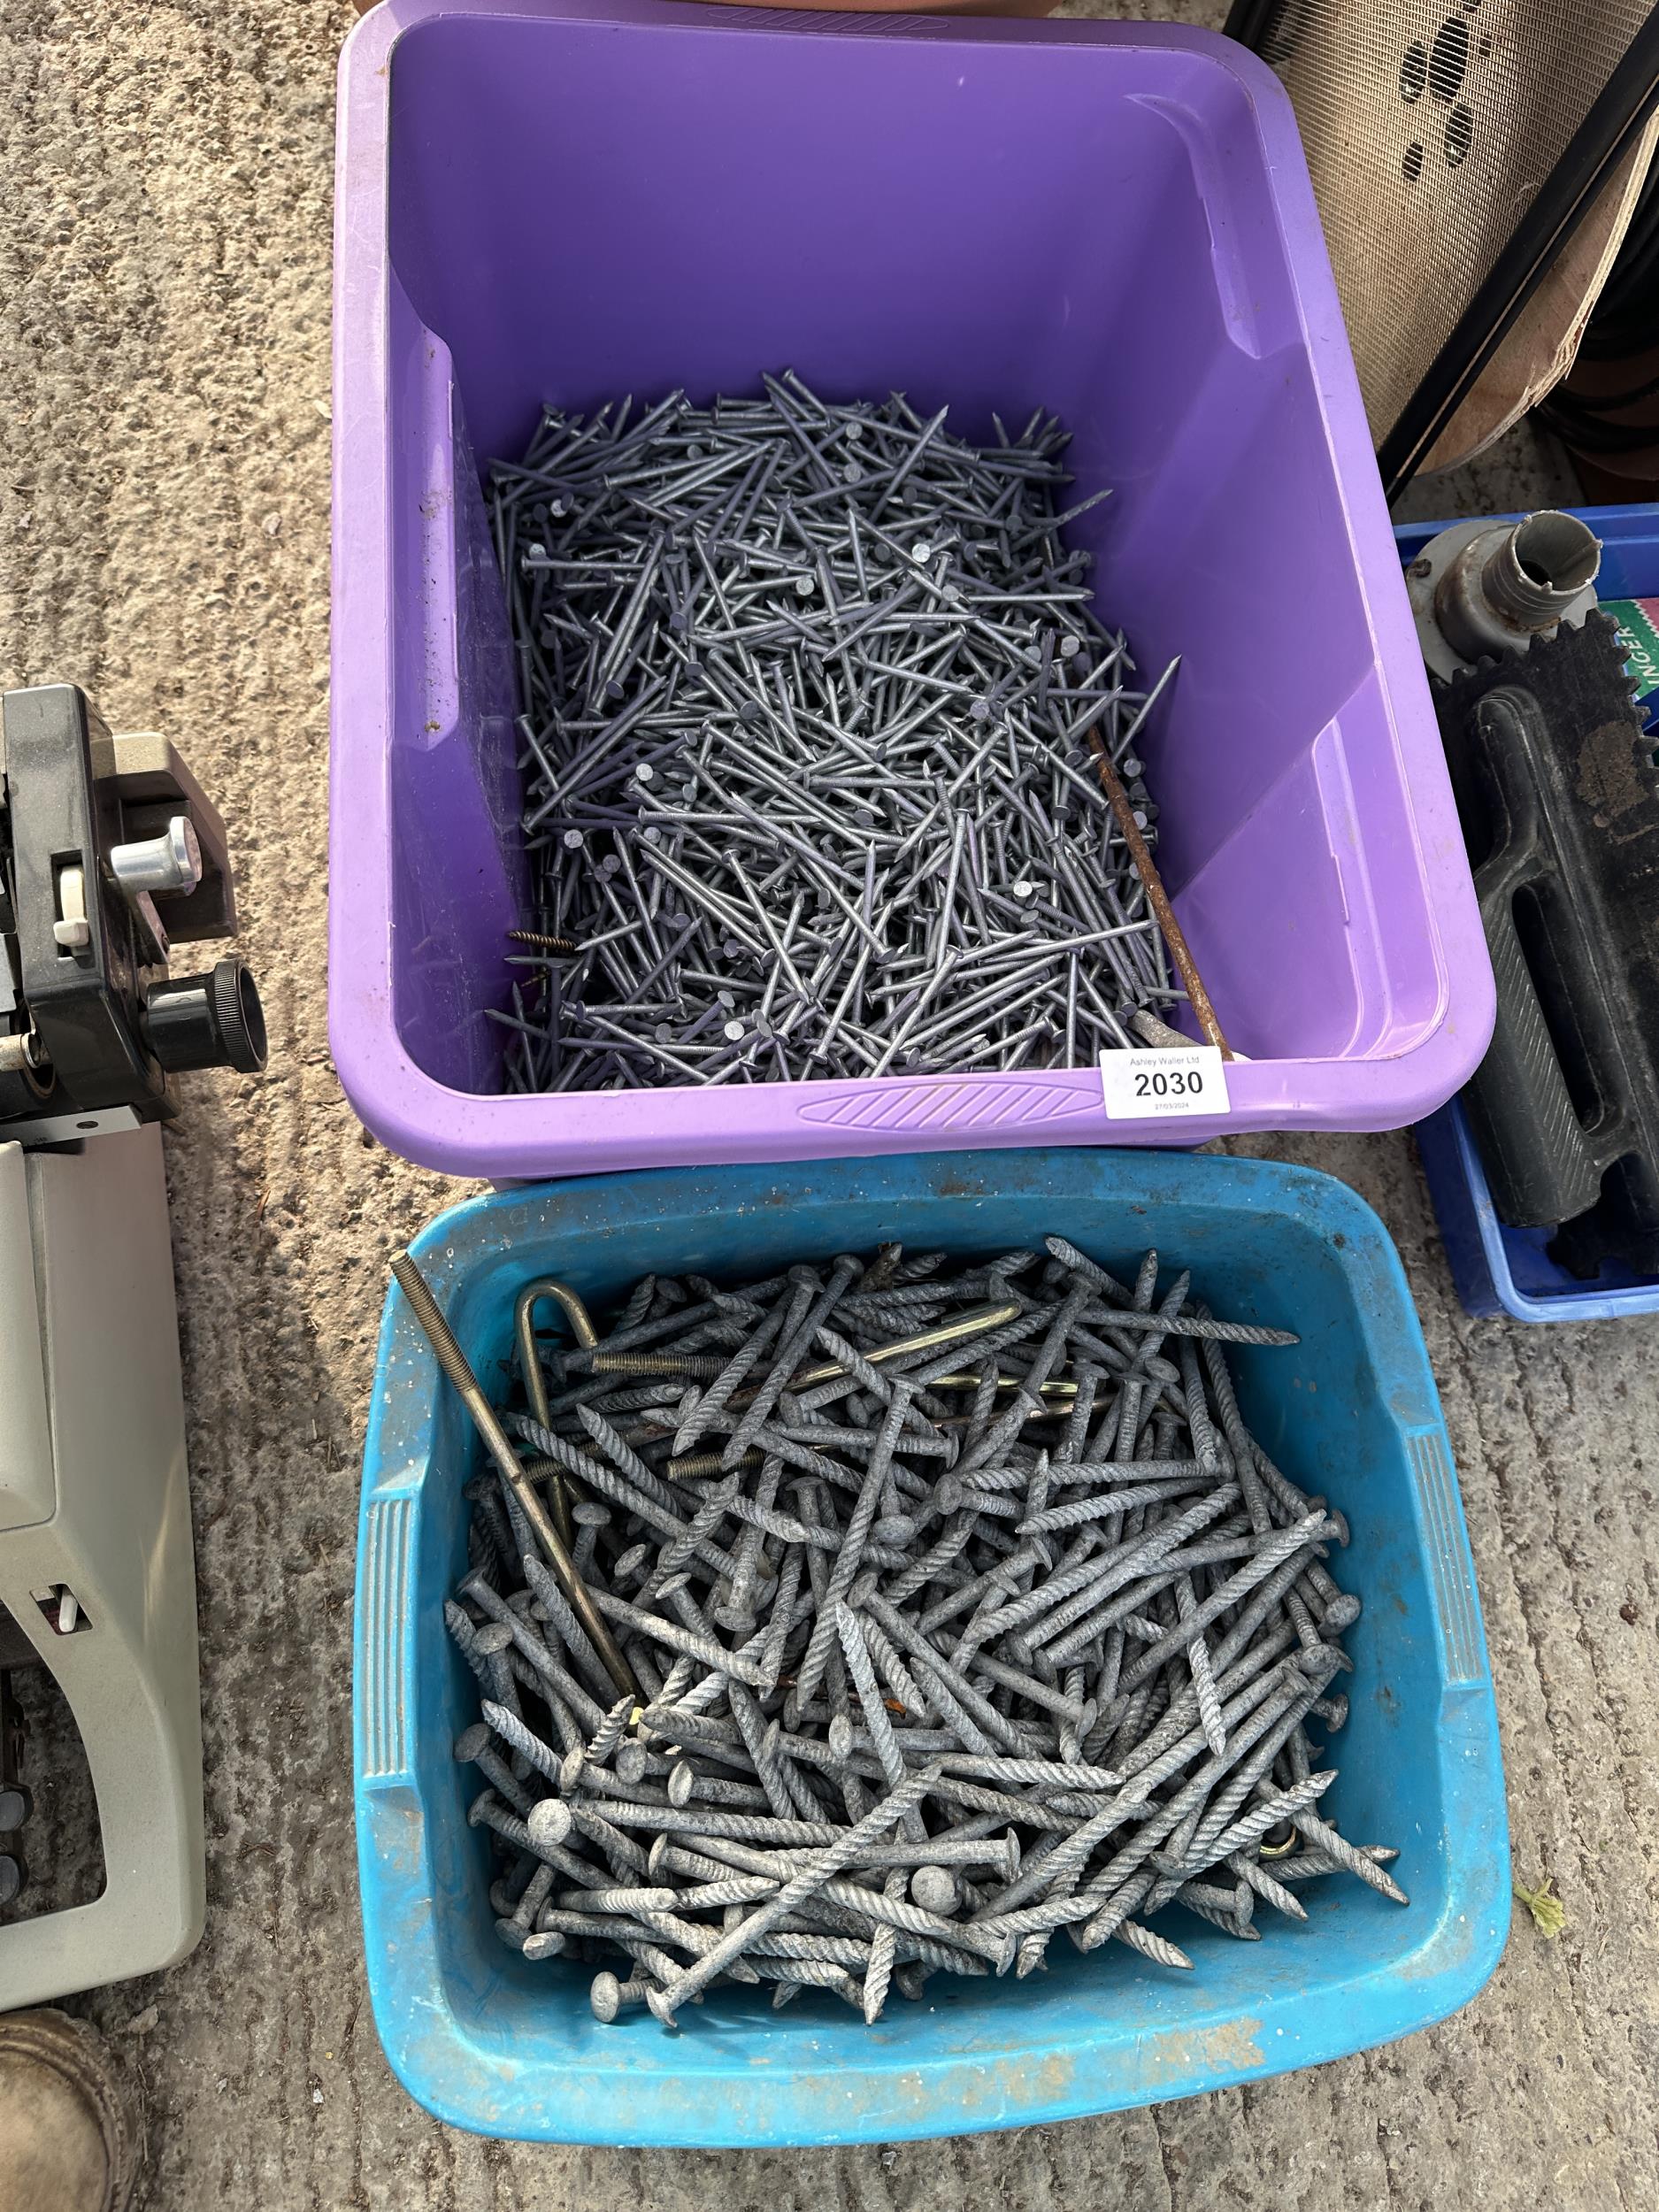 A LARGE QUANTITY OF ASSORTED NAILS AND A LARGE PLASTIC PLANT POT - Image 2 of 3